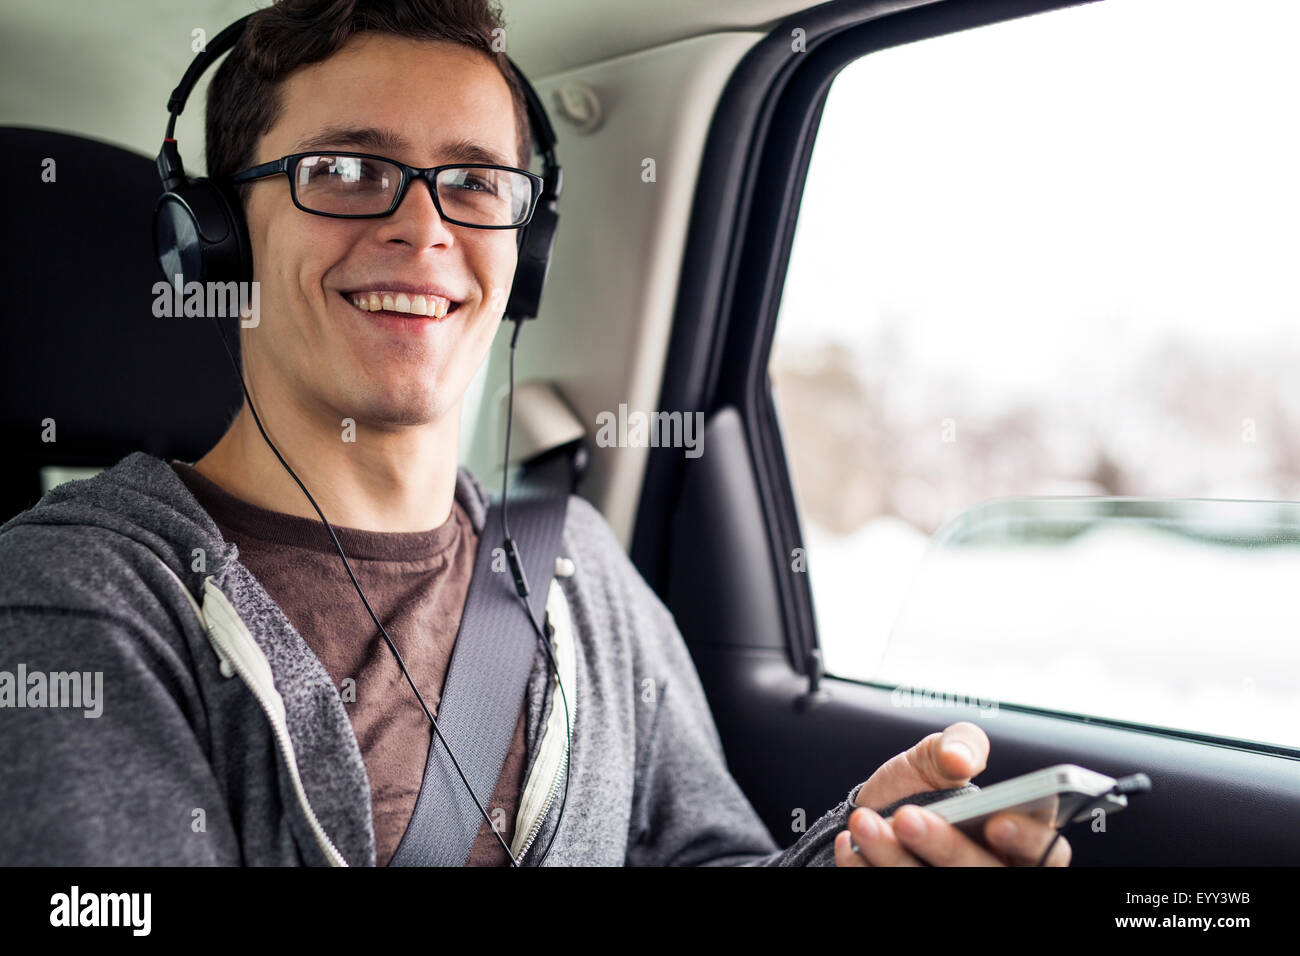 Caucasian man listening to mp3 player in car Stock Photo